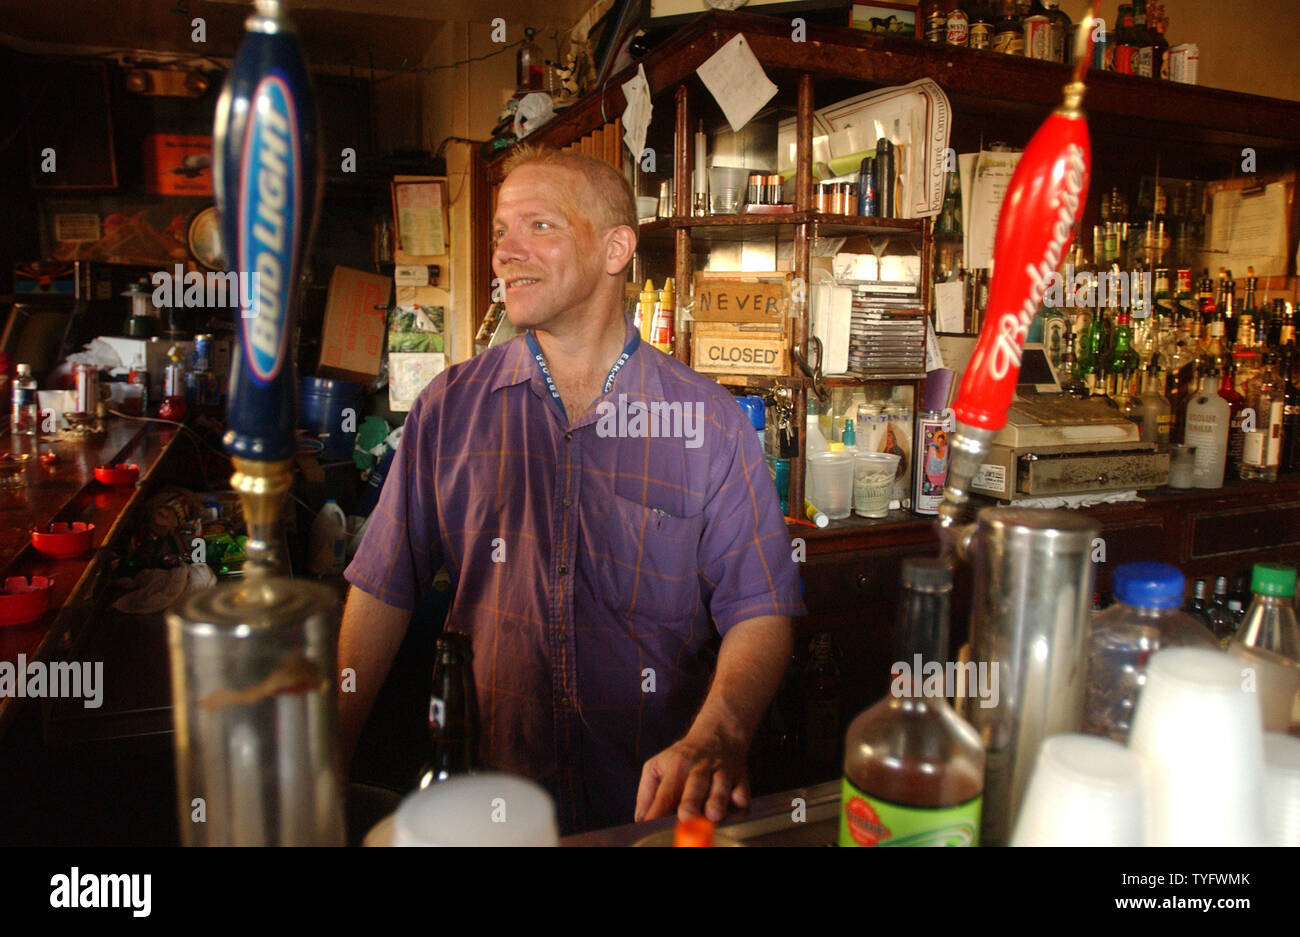 Denny Hooper tends bar in the French Quarter of New Orleans on Sept. 8, 2005. Although a large portion of the city remains innundated, residents and business owners have begun to clean up the damage caused by Hurricane Katrina in the drier areas.    (UPI Photo/Roger L. Wollenberg) Stock Photo